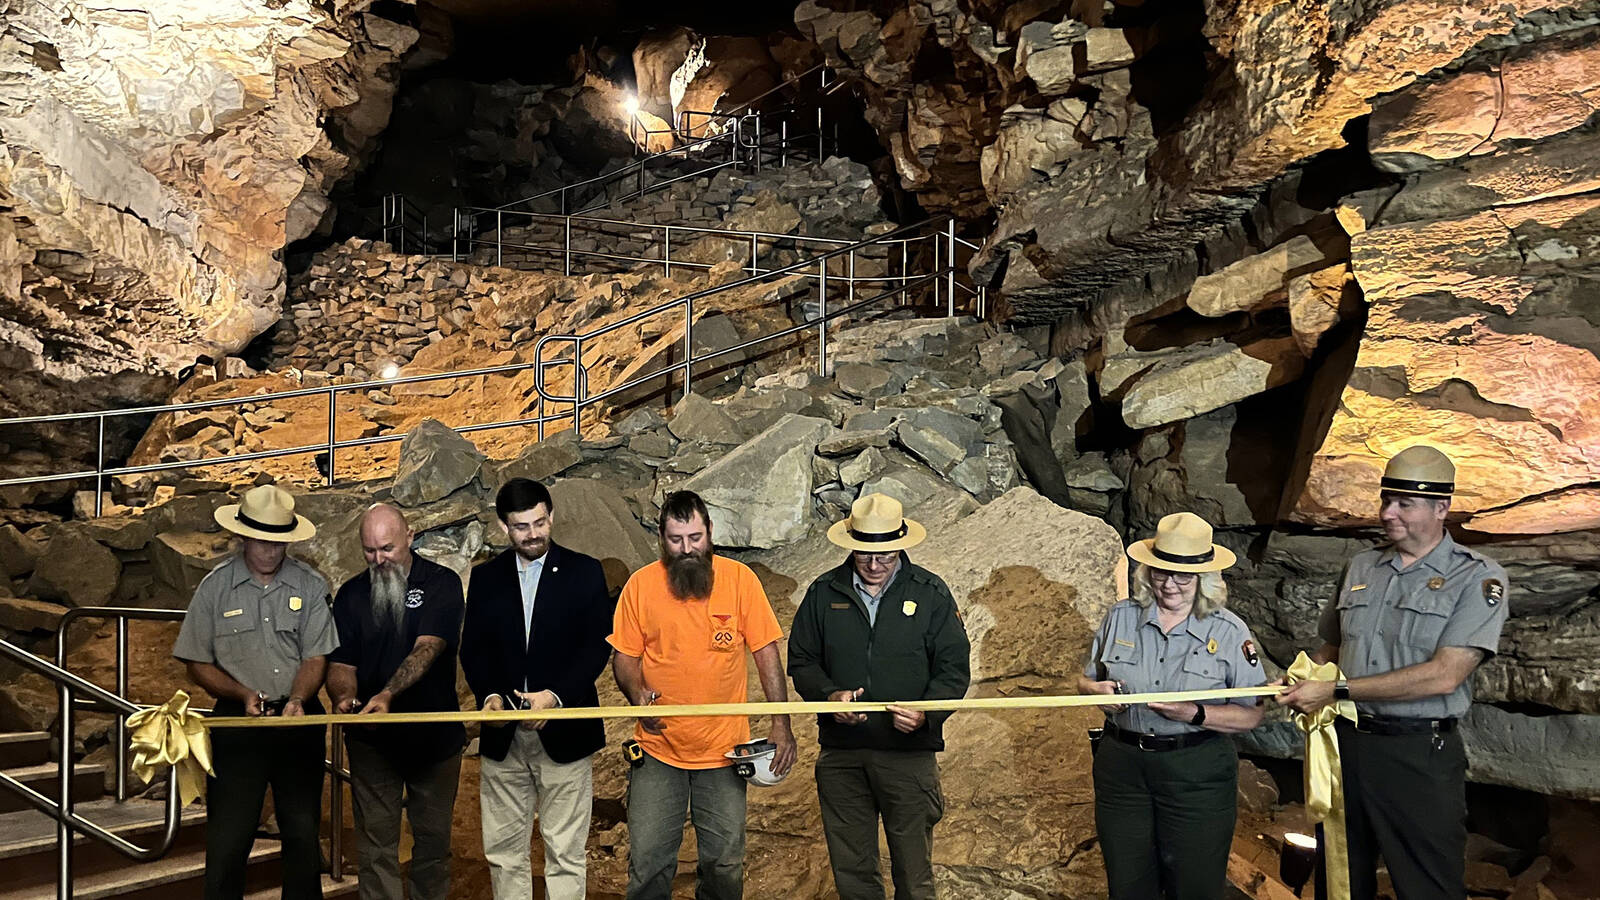 <p>Rehabilitation of one mile of trail at Mammoth Cave National Park in Kentucky. Improving access and safety via hardening the trail surface, installing new handrails and curbs and renovating several sets of stairs. </p>